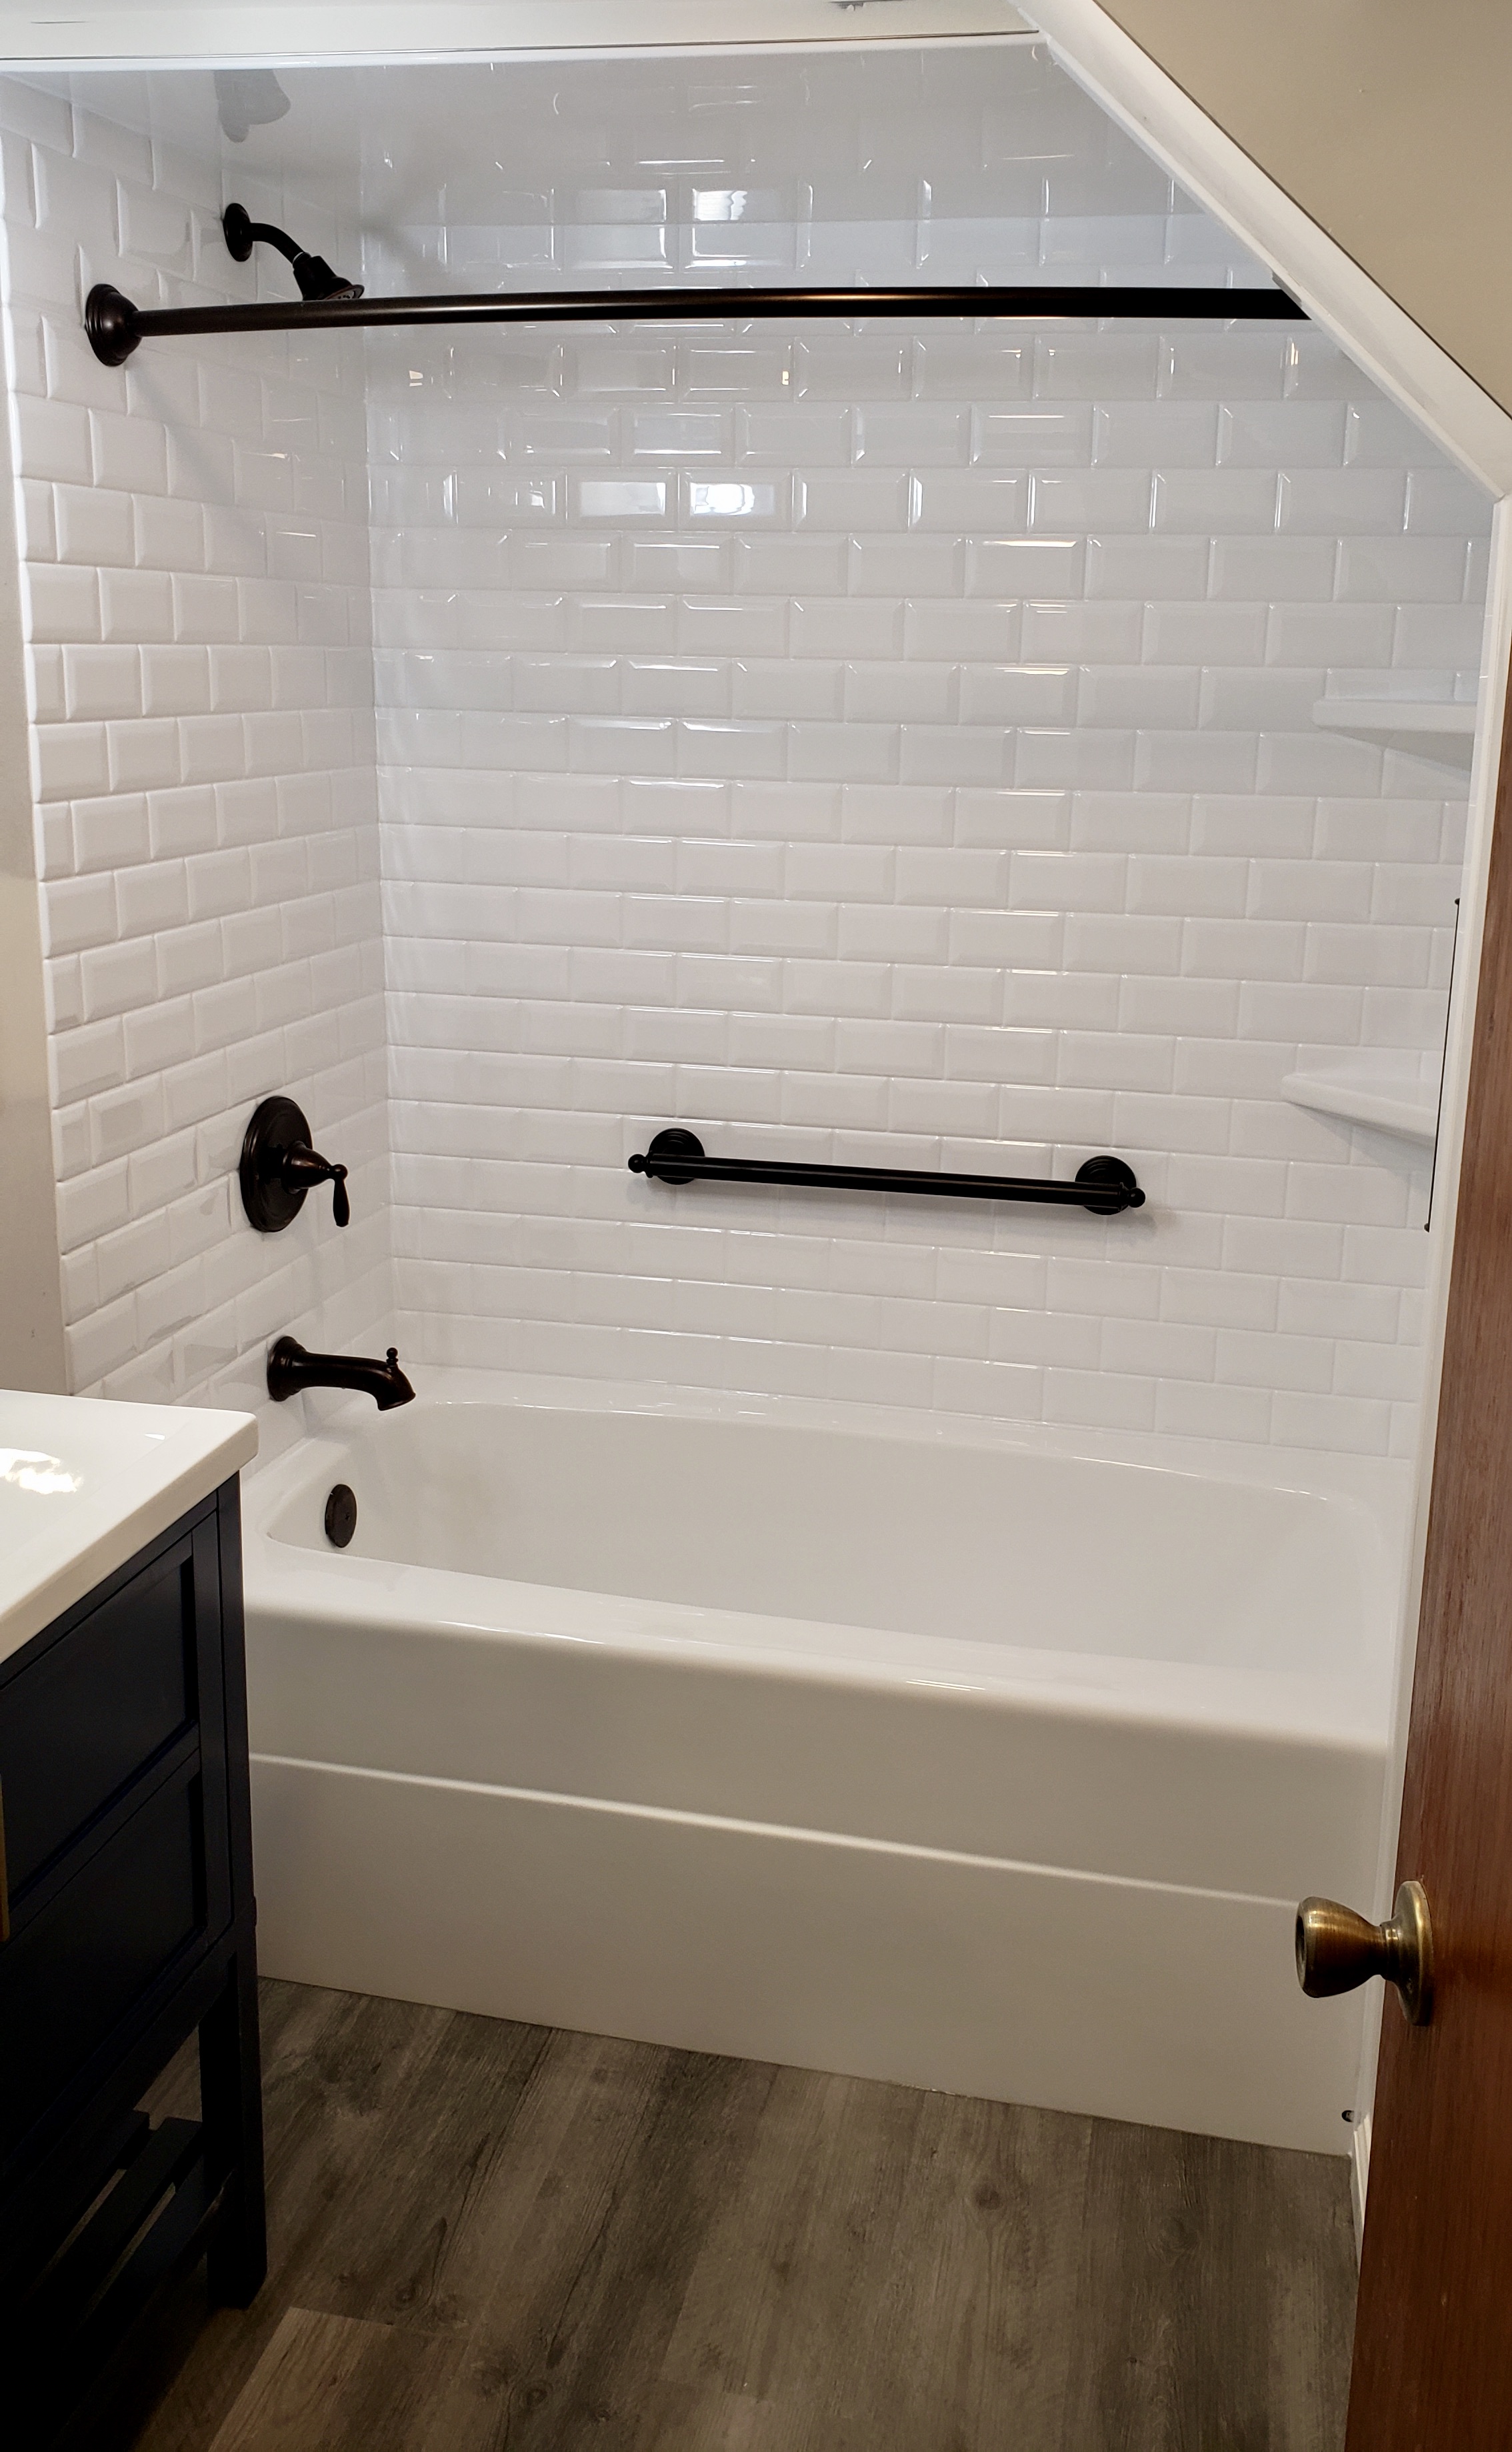 Completed Bathroom Remodeling Projects, Tub Surrounds That Look Like Tile